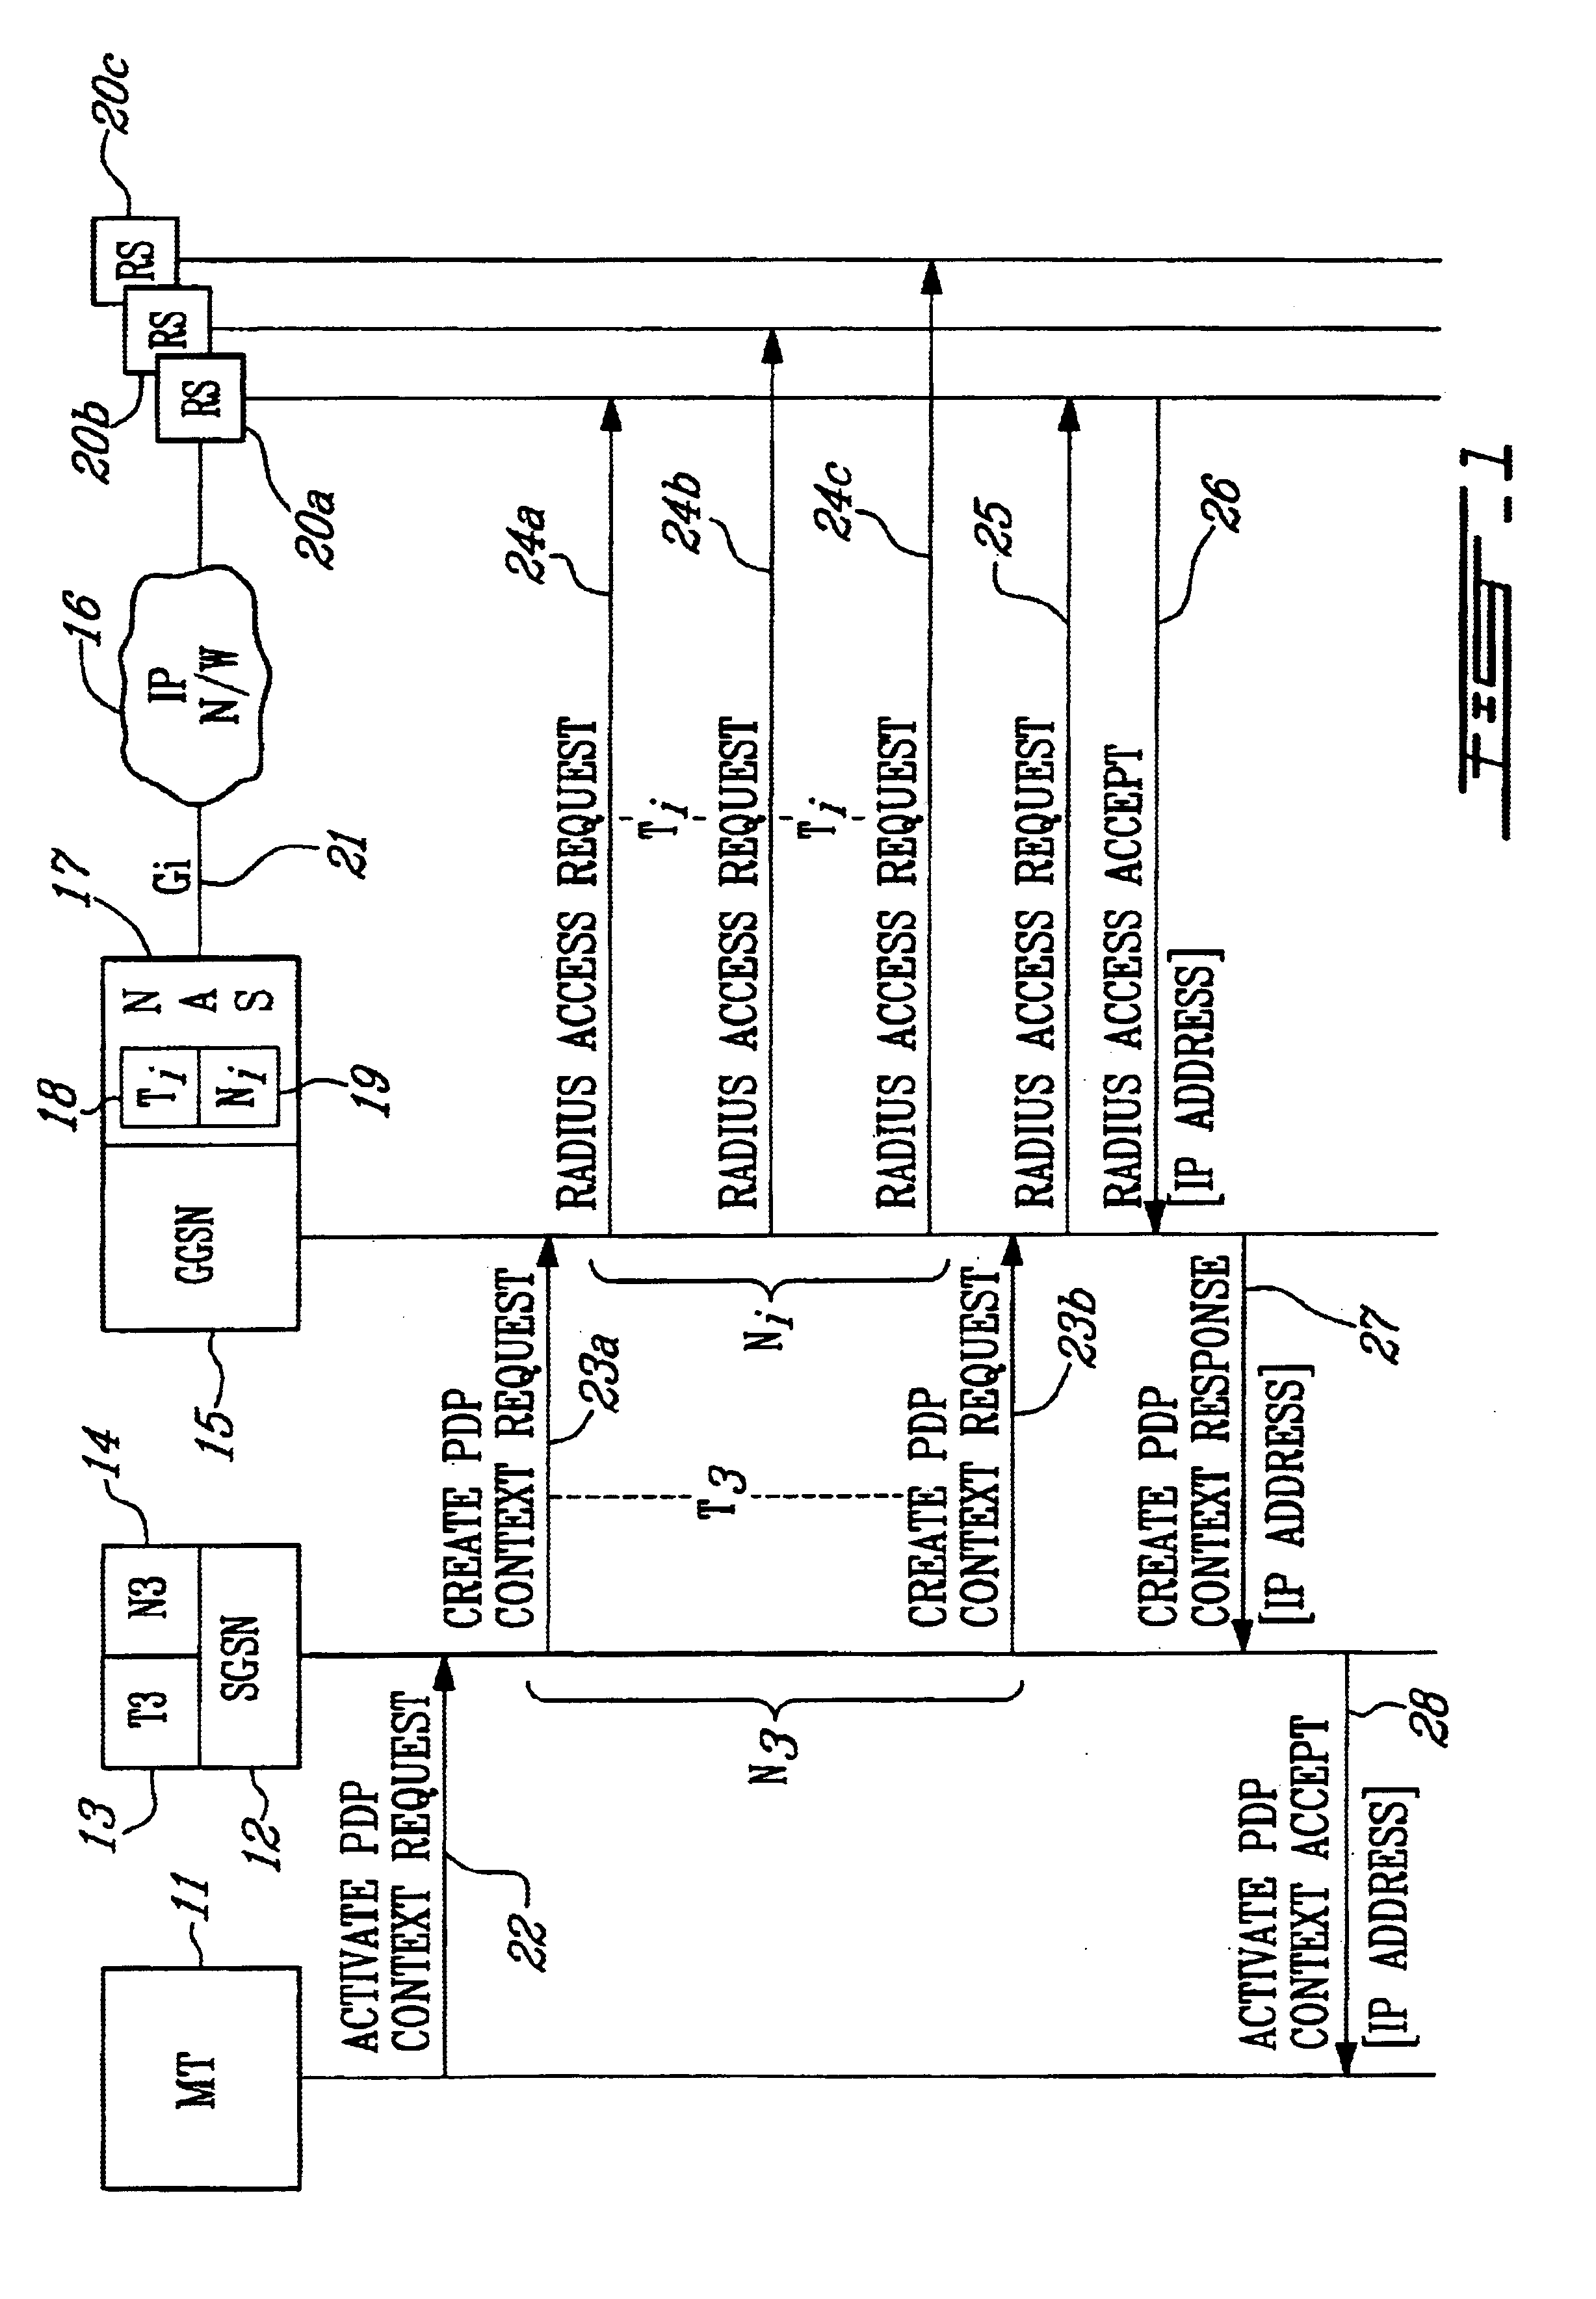 Dynamic IP address allocation system and method